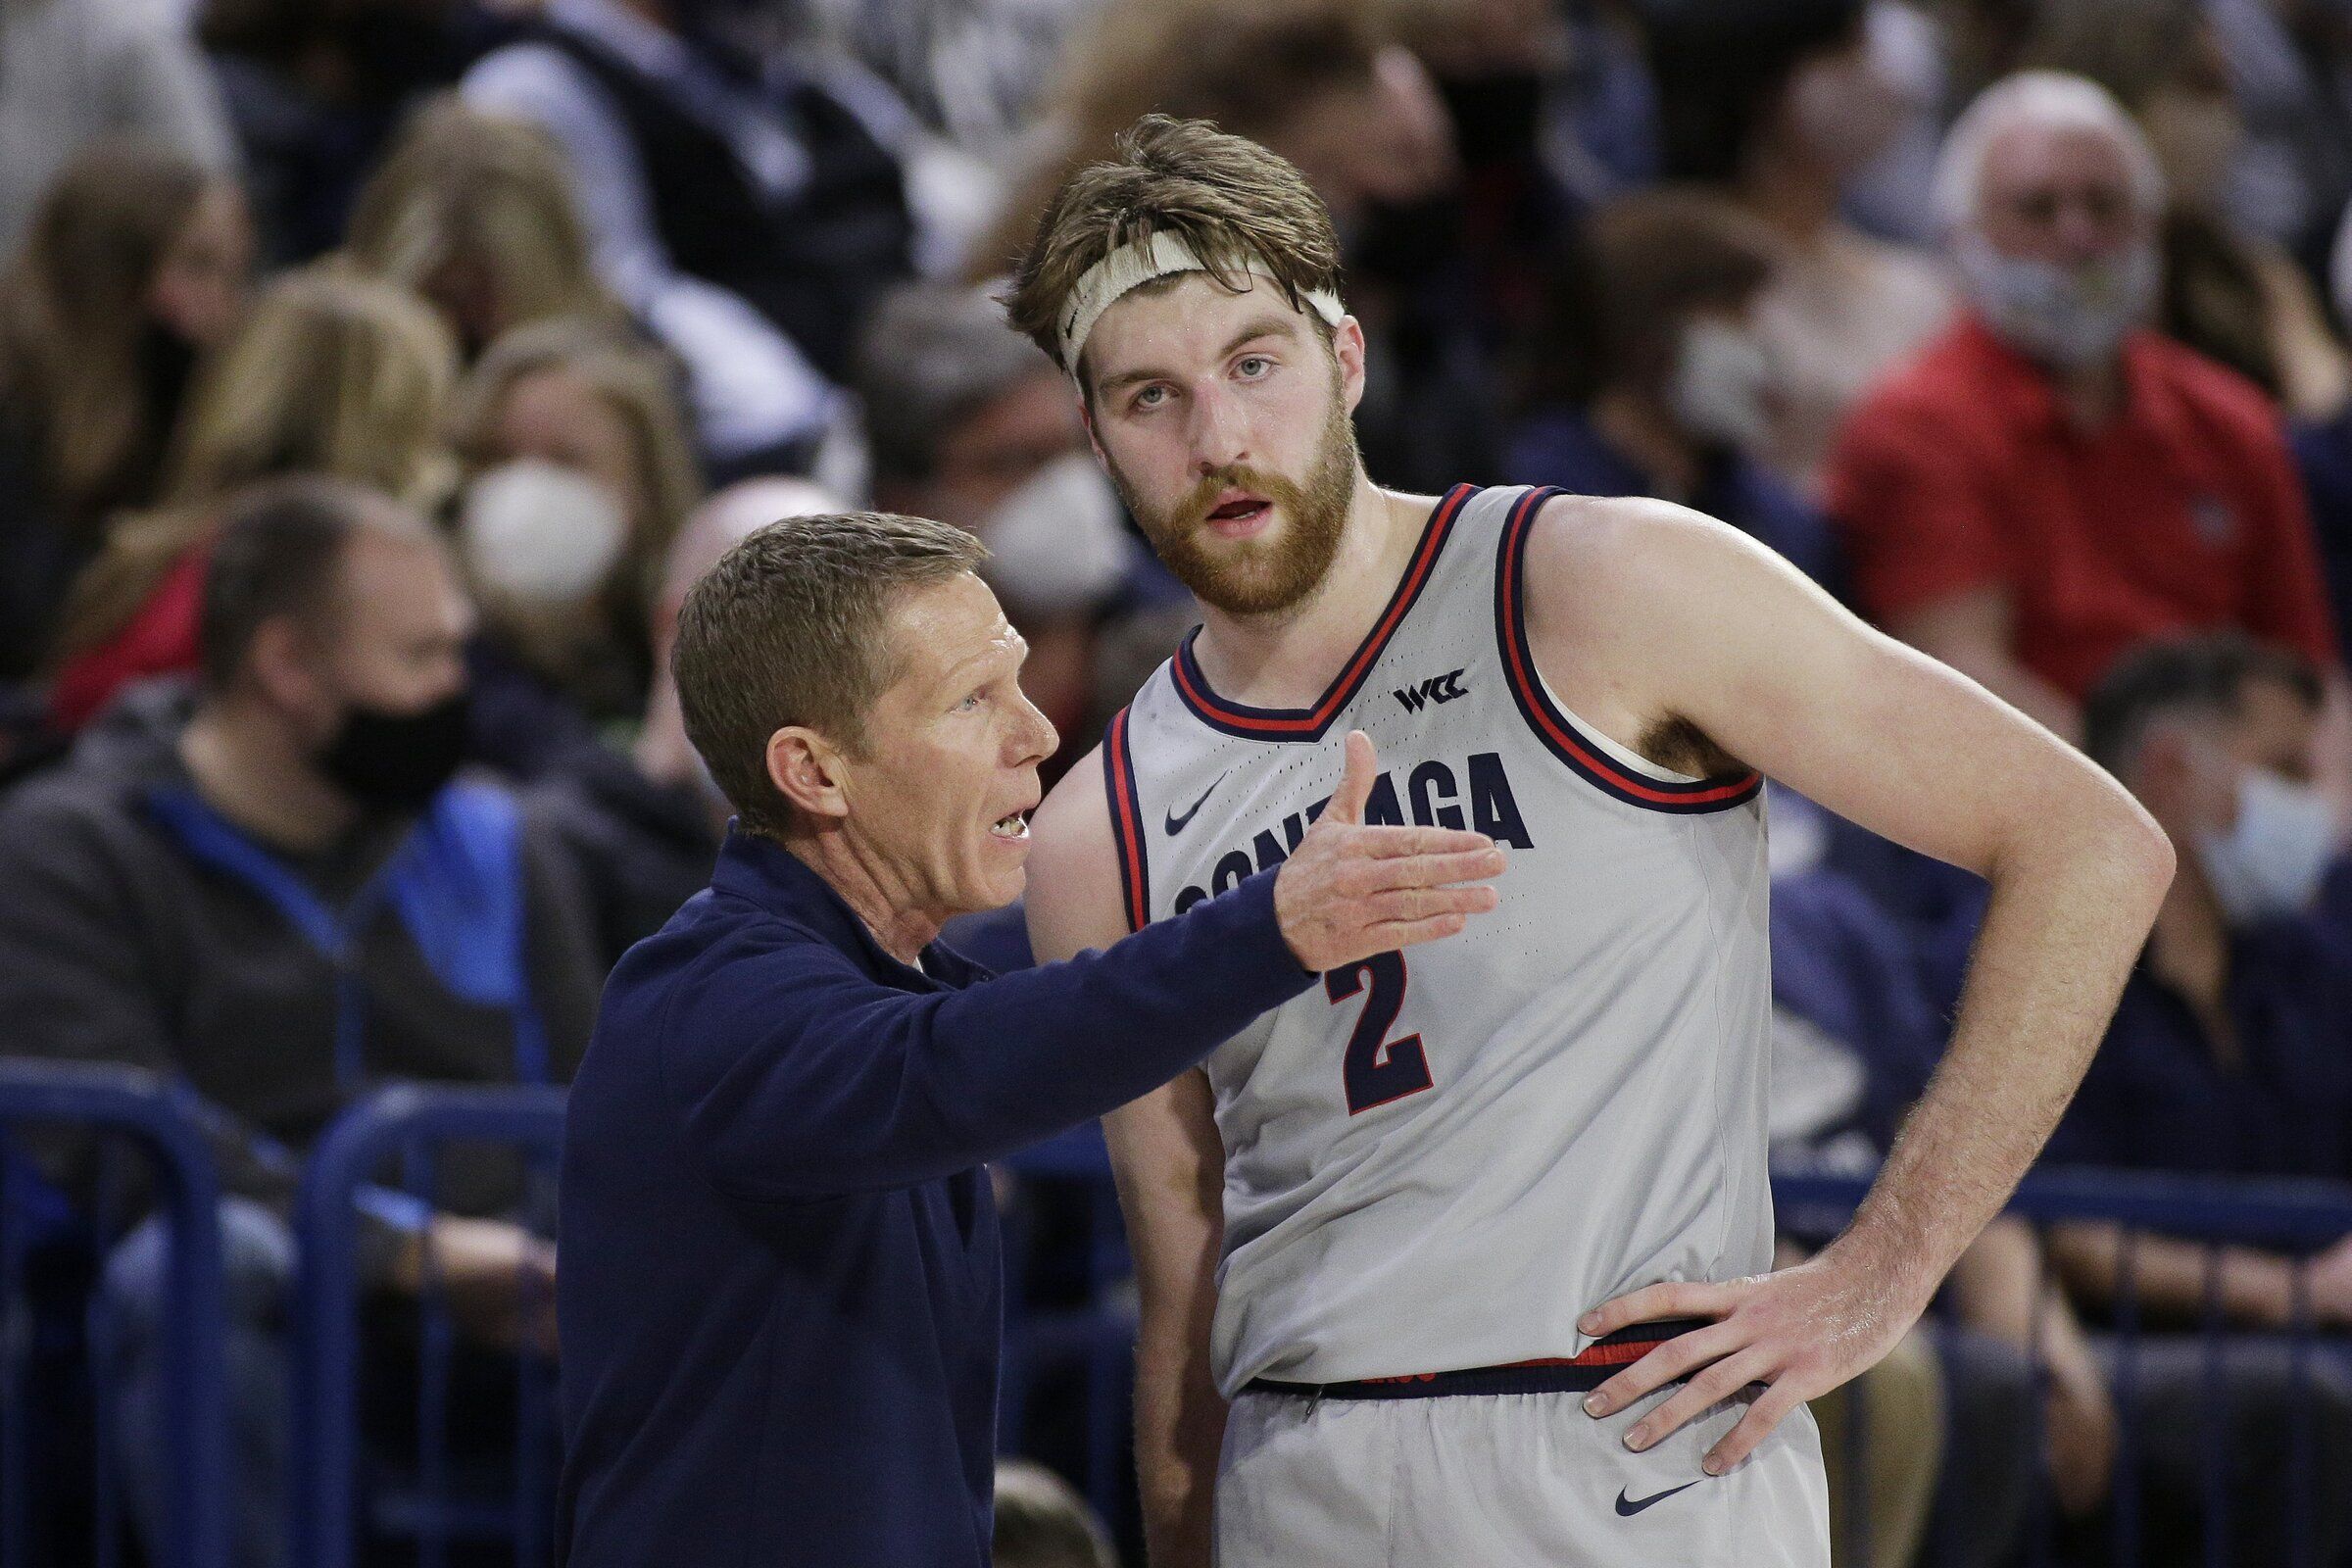 Drew Timme leads trio returning to school from NBA tryouts, boosting the Gonzaga mens team The Seattle Times